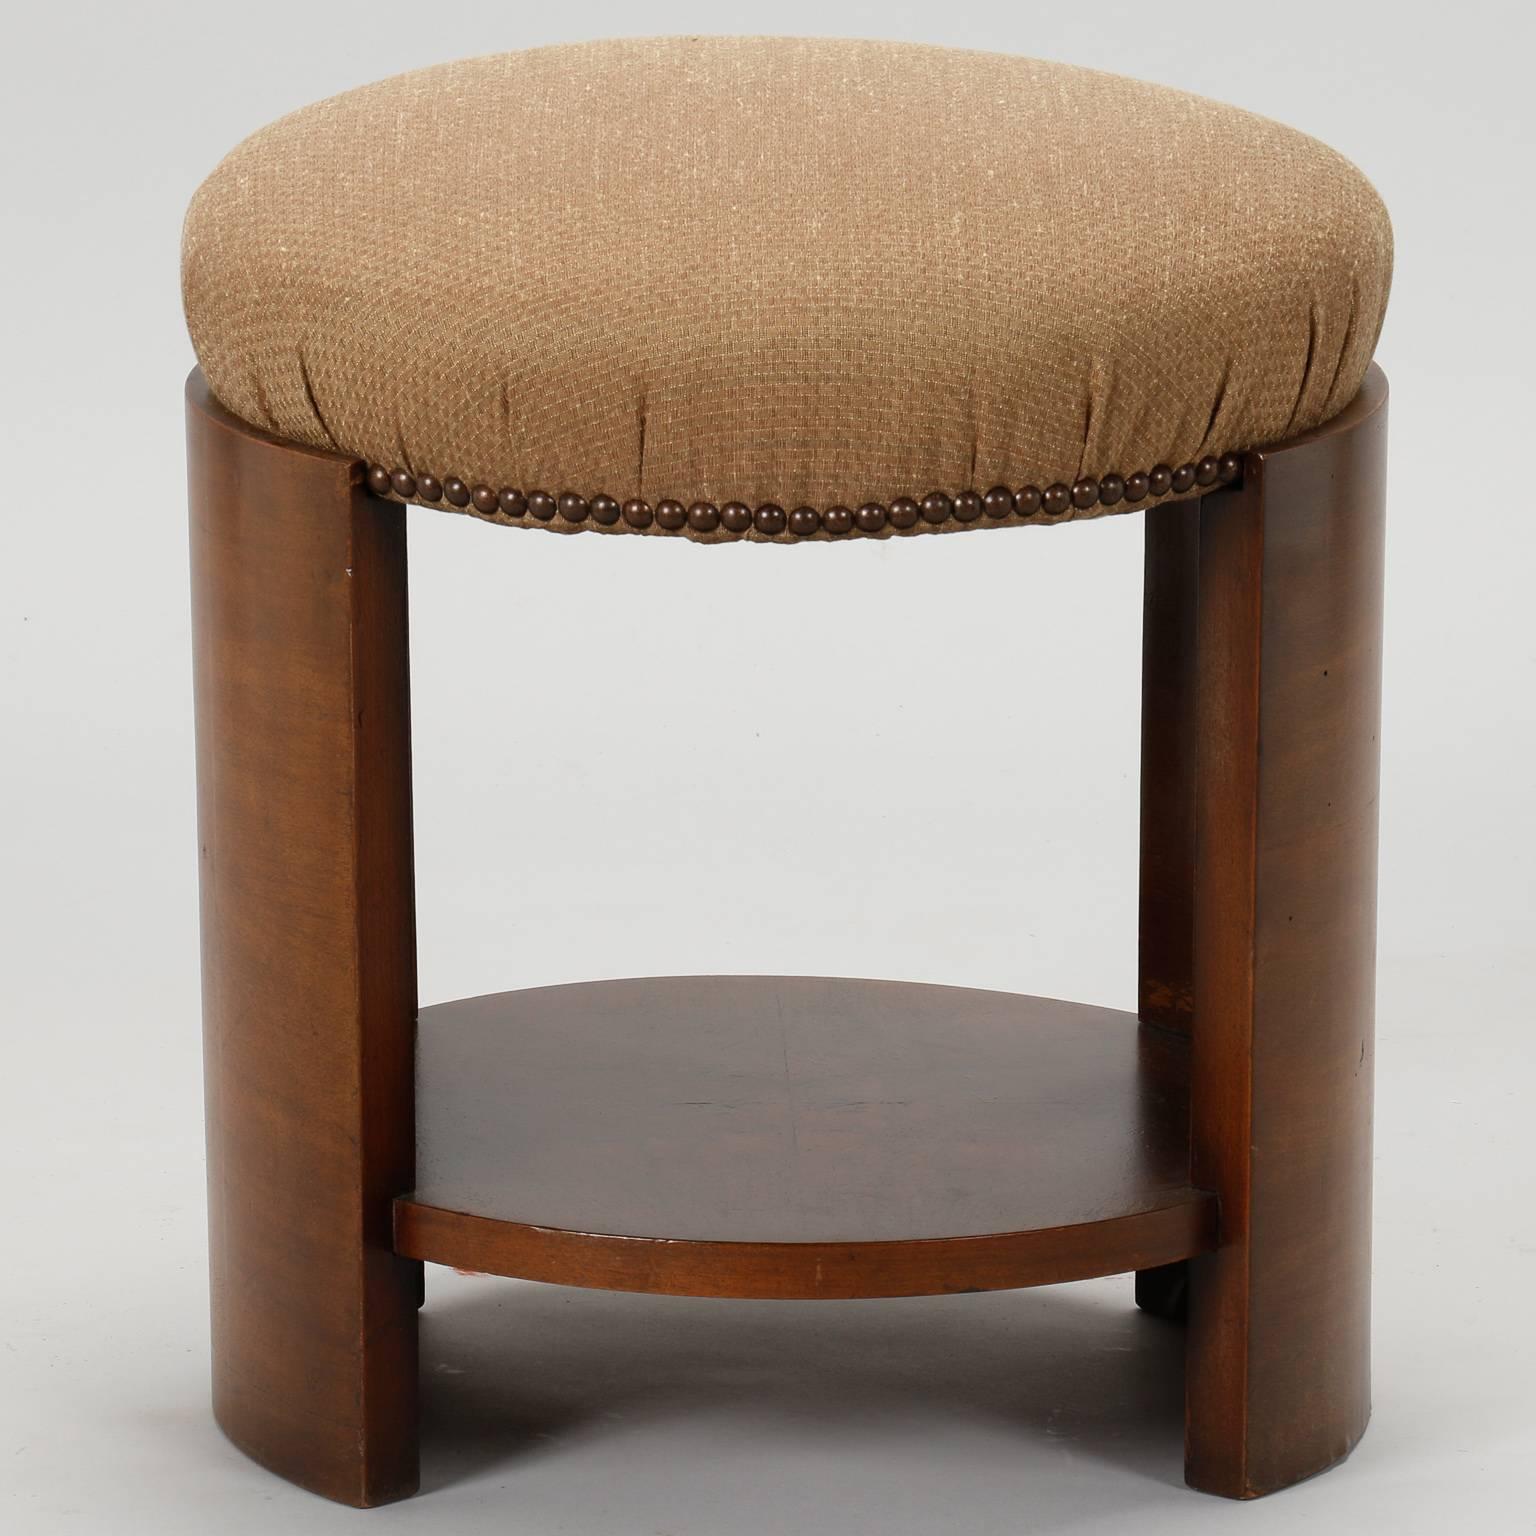 French Art Deco stool, circa 1930s. Round upholstered seat has been newly covered and trimmed with brass nailheads, curved walnut legs and round lower support. Size: Seat is 19” high.